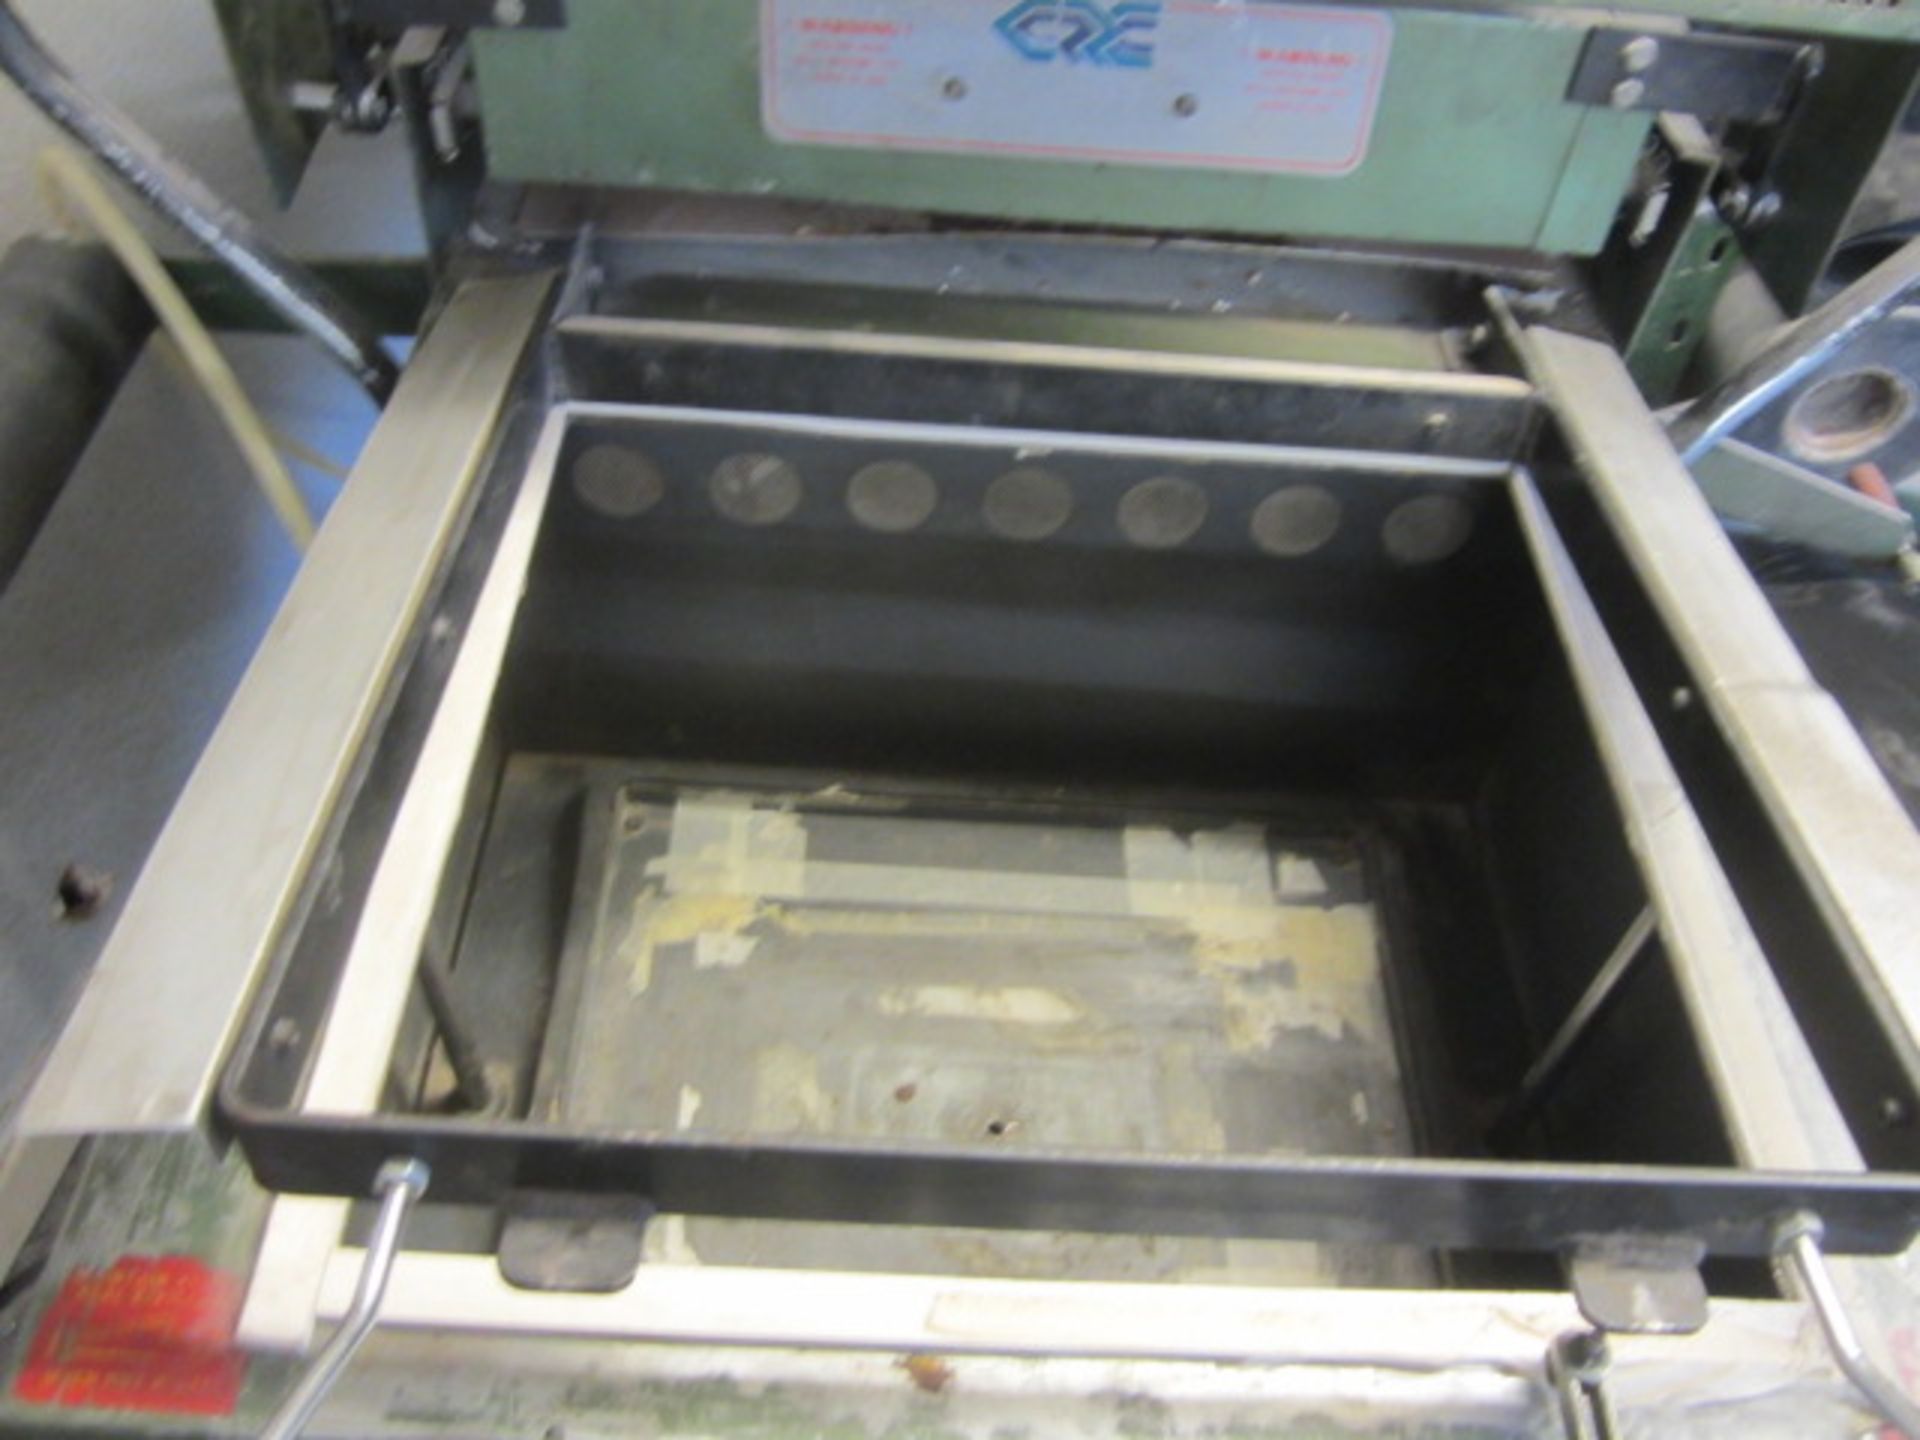 CRC 1820 auto vacuum former, 4 zone, manual platen raise with reel dispenser. Located at Supreme - Image 3 of 7